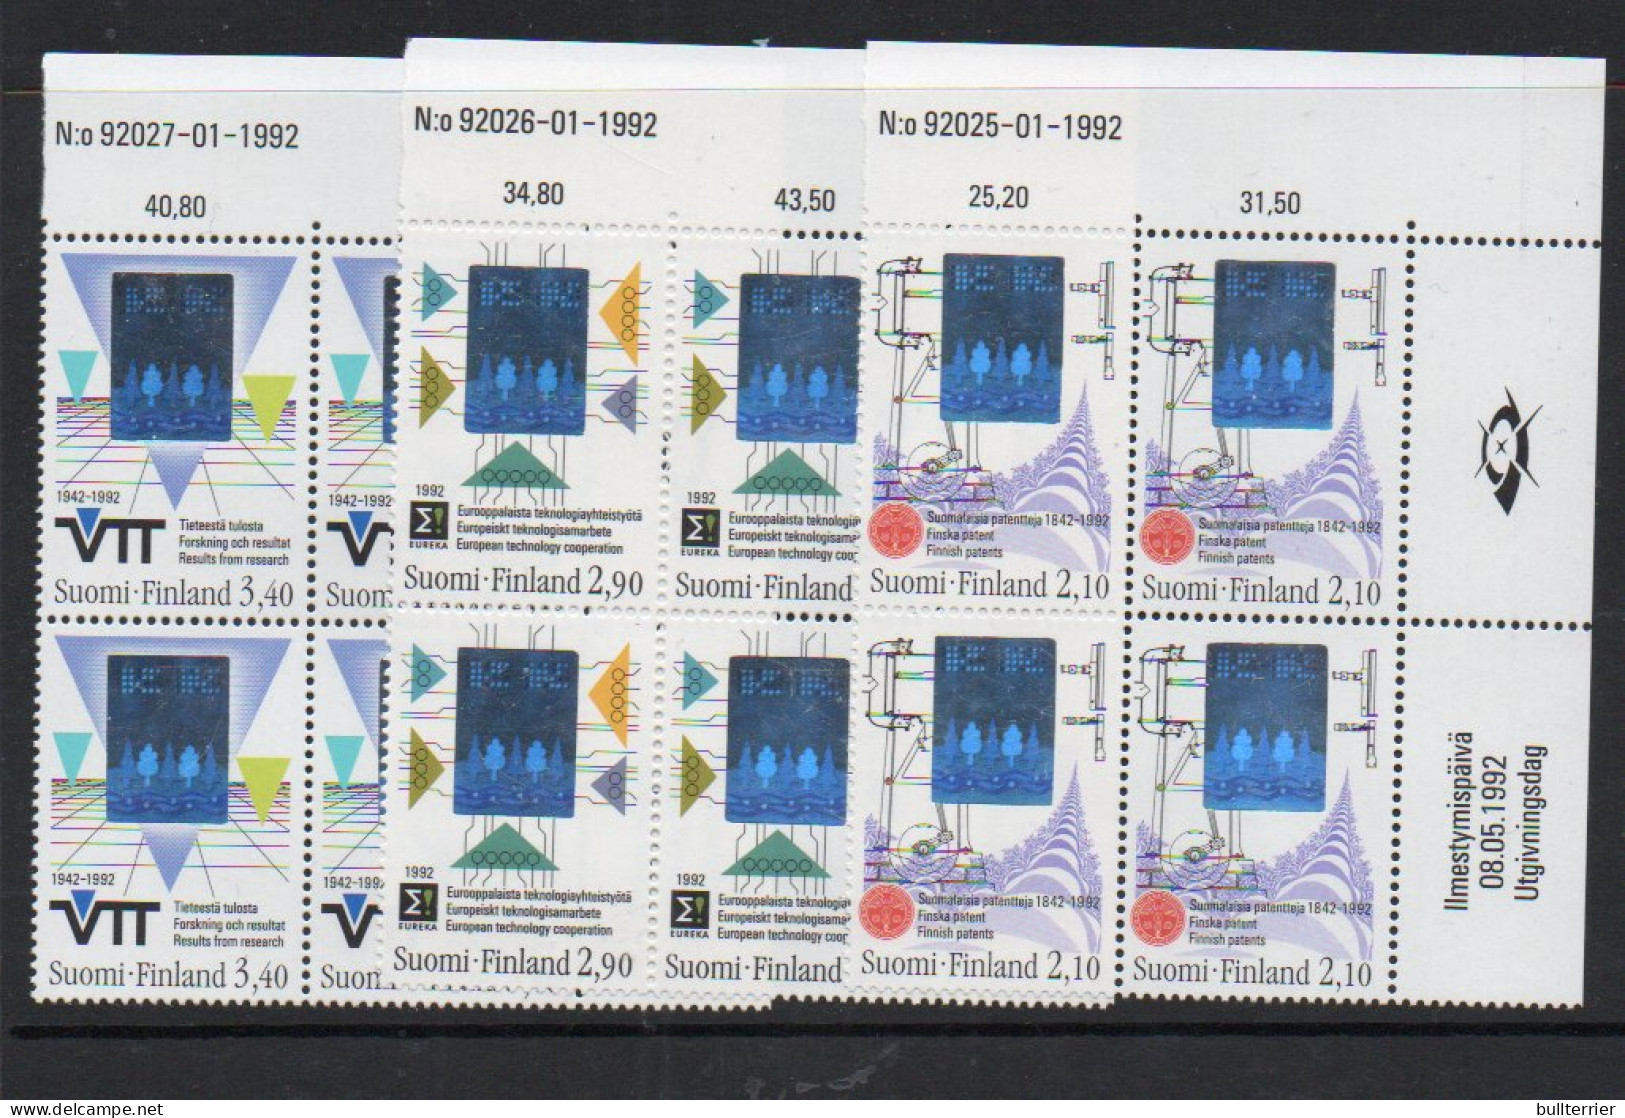 HOLOGRAMS - FINLAND - 1992 -TECHNOLOGY HOLOGRAMS SET OF 3 IN BLOCKS OF 4 MINT NEVER HINGED, SG CAT £35 - Hologramme